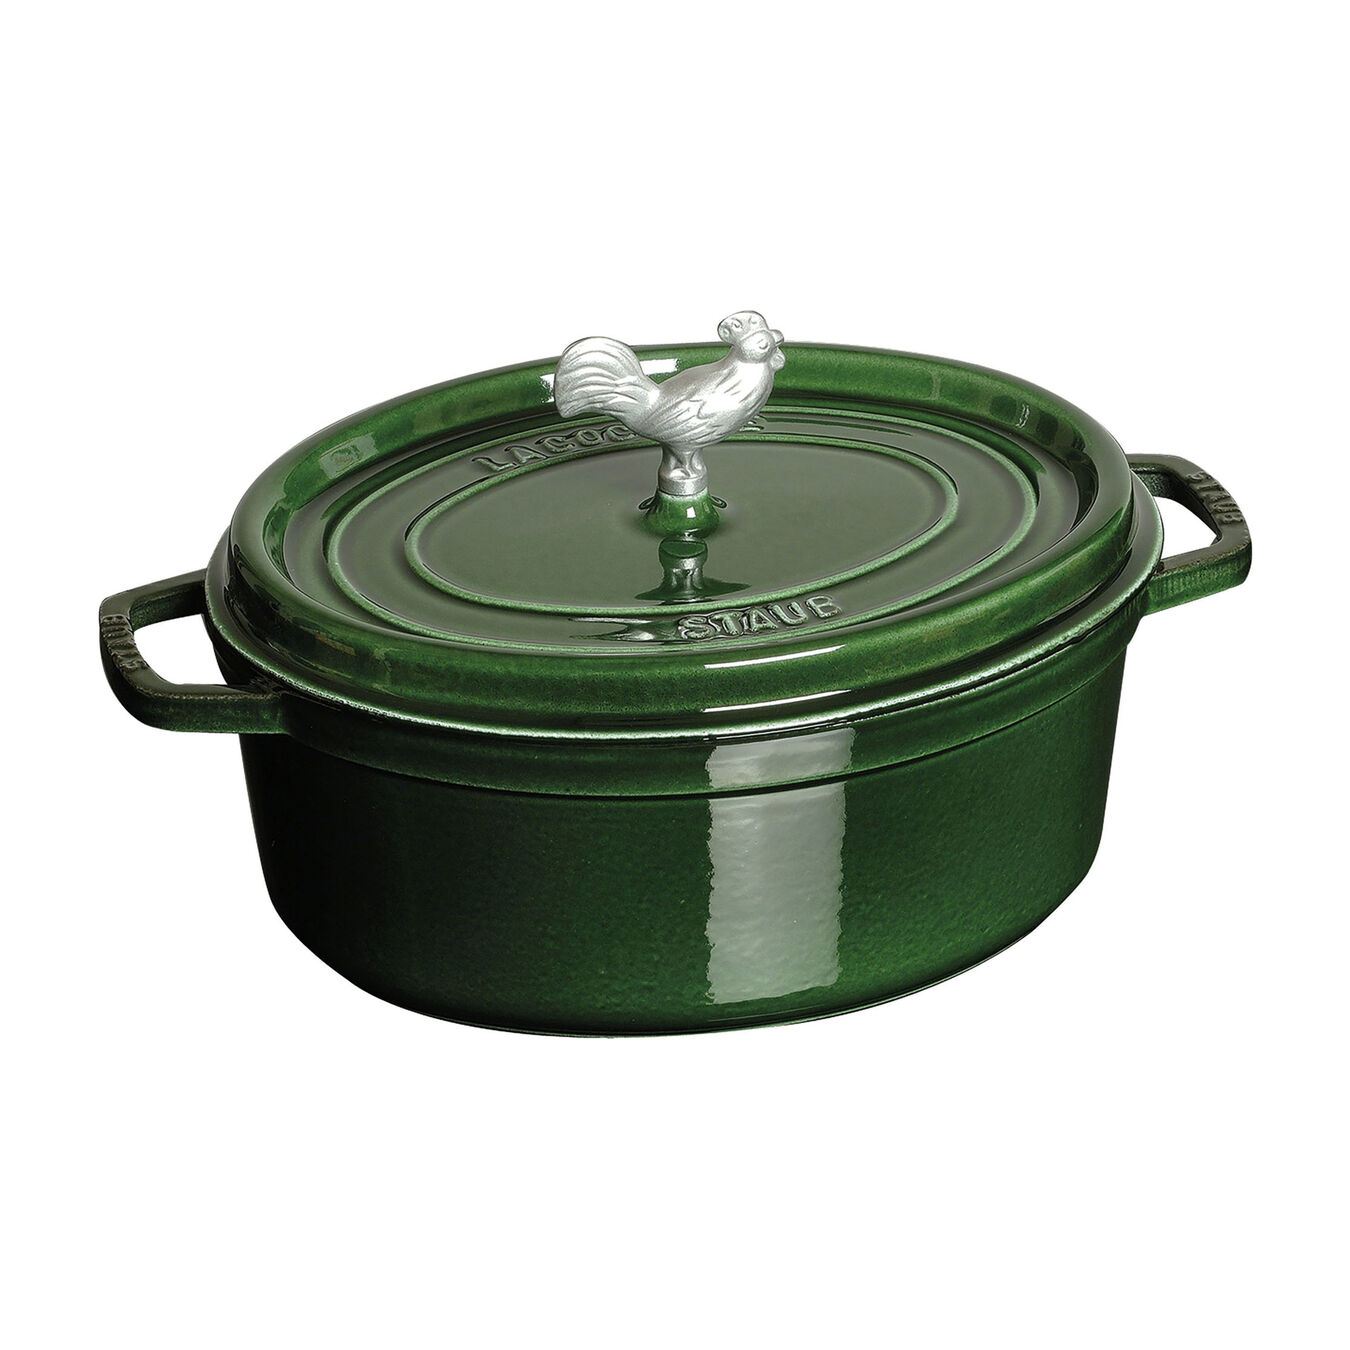 5.5 l cast iron oval Cocotte with rooster knob, basil-green,,large 1